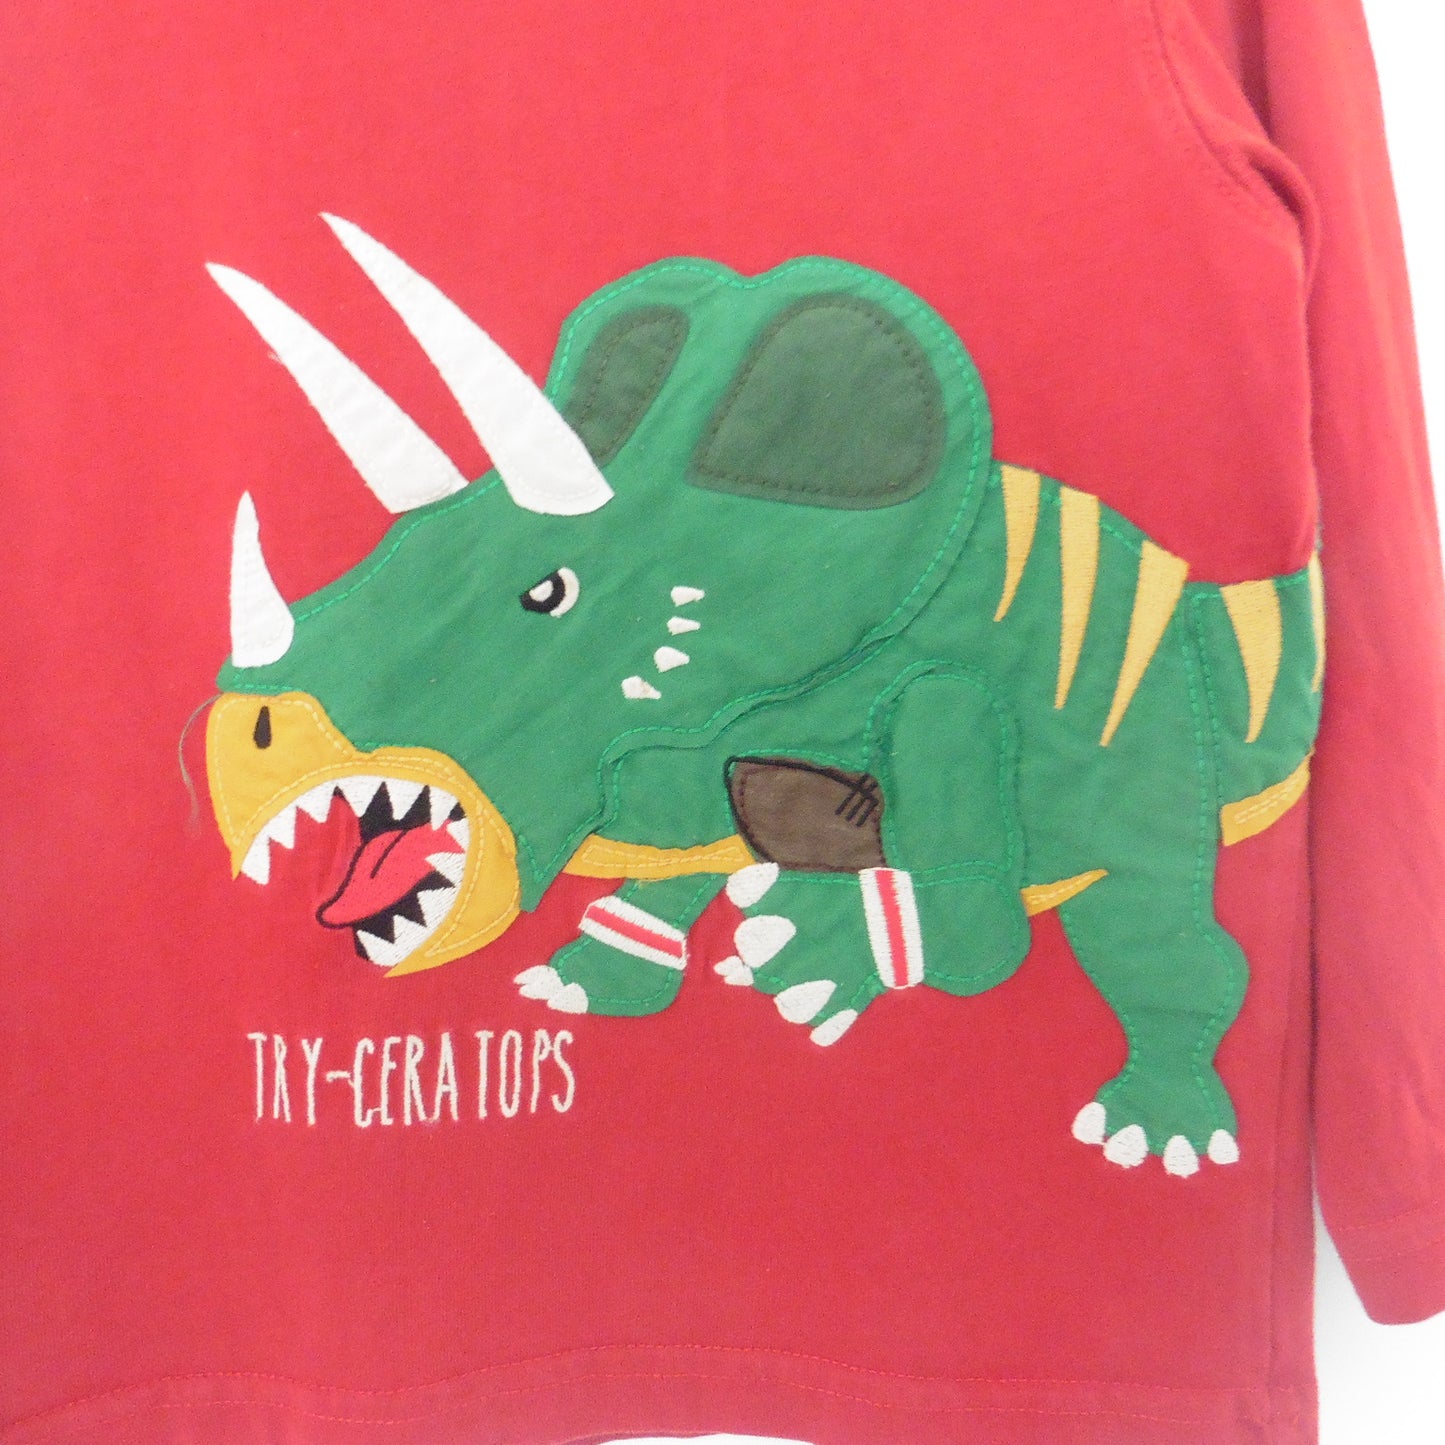 Preloved Joules Red Long Sleeve Top with Dinosaur 2y